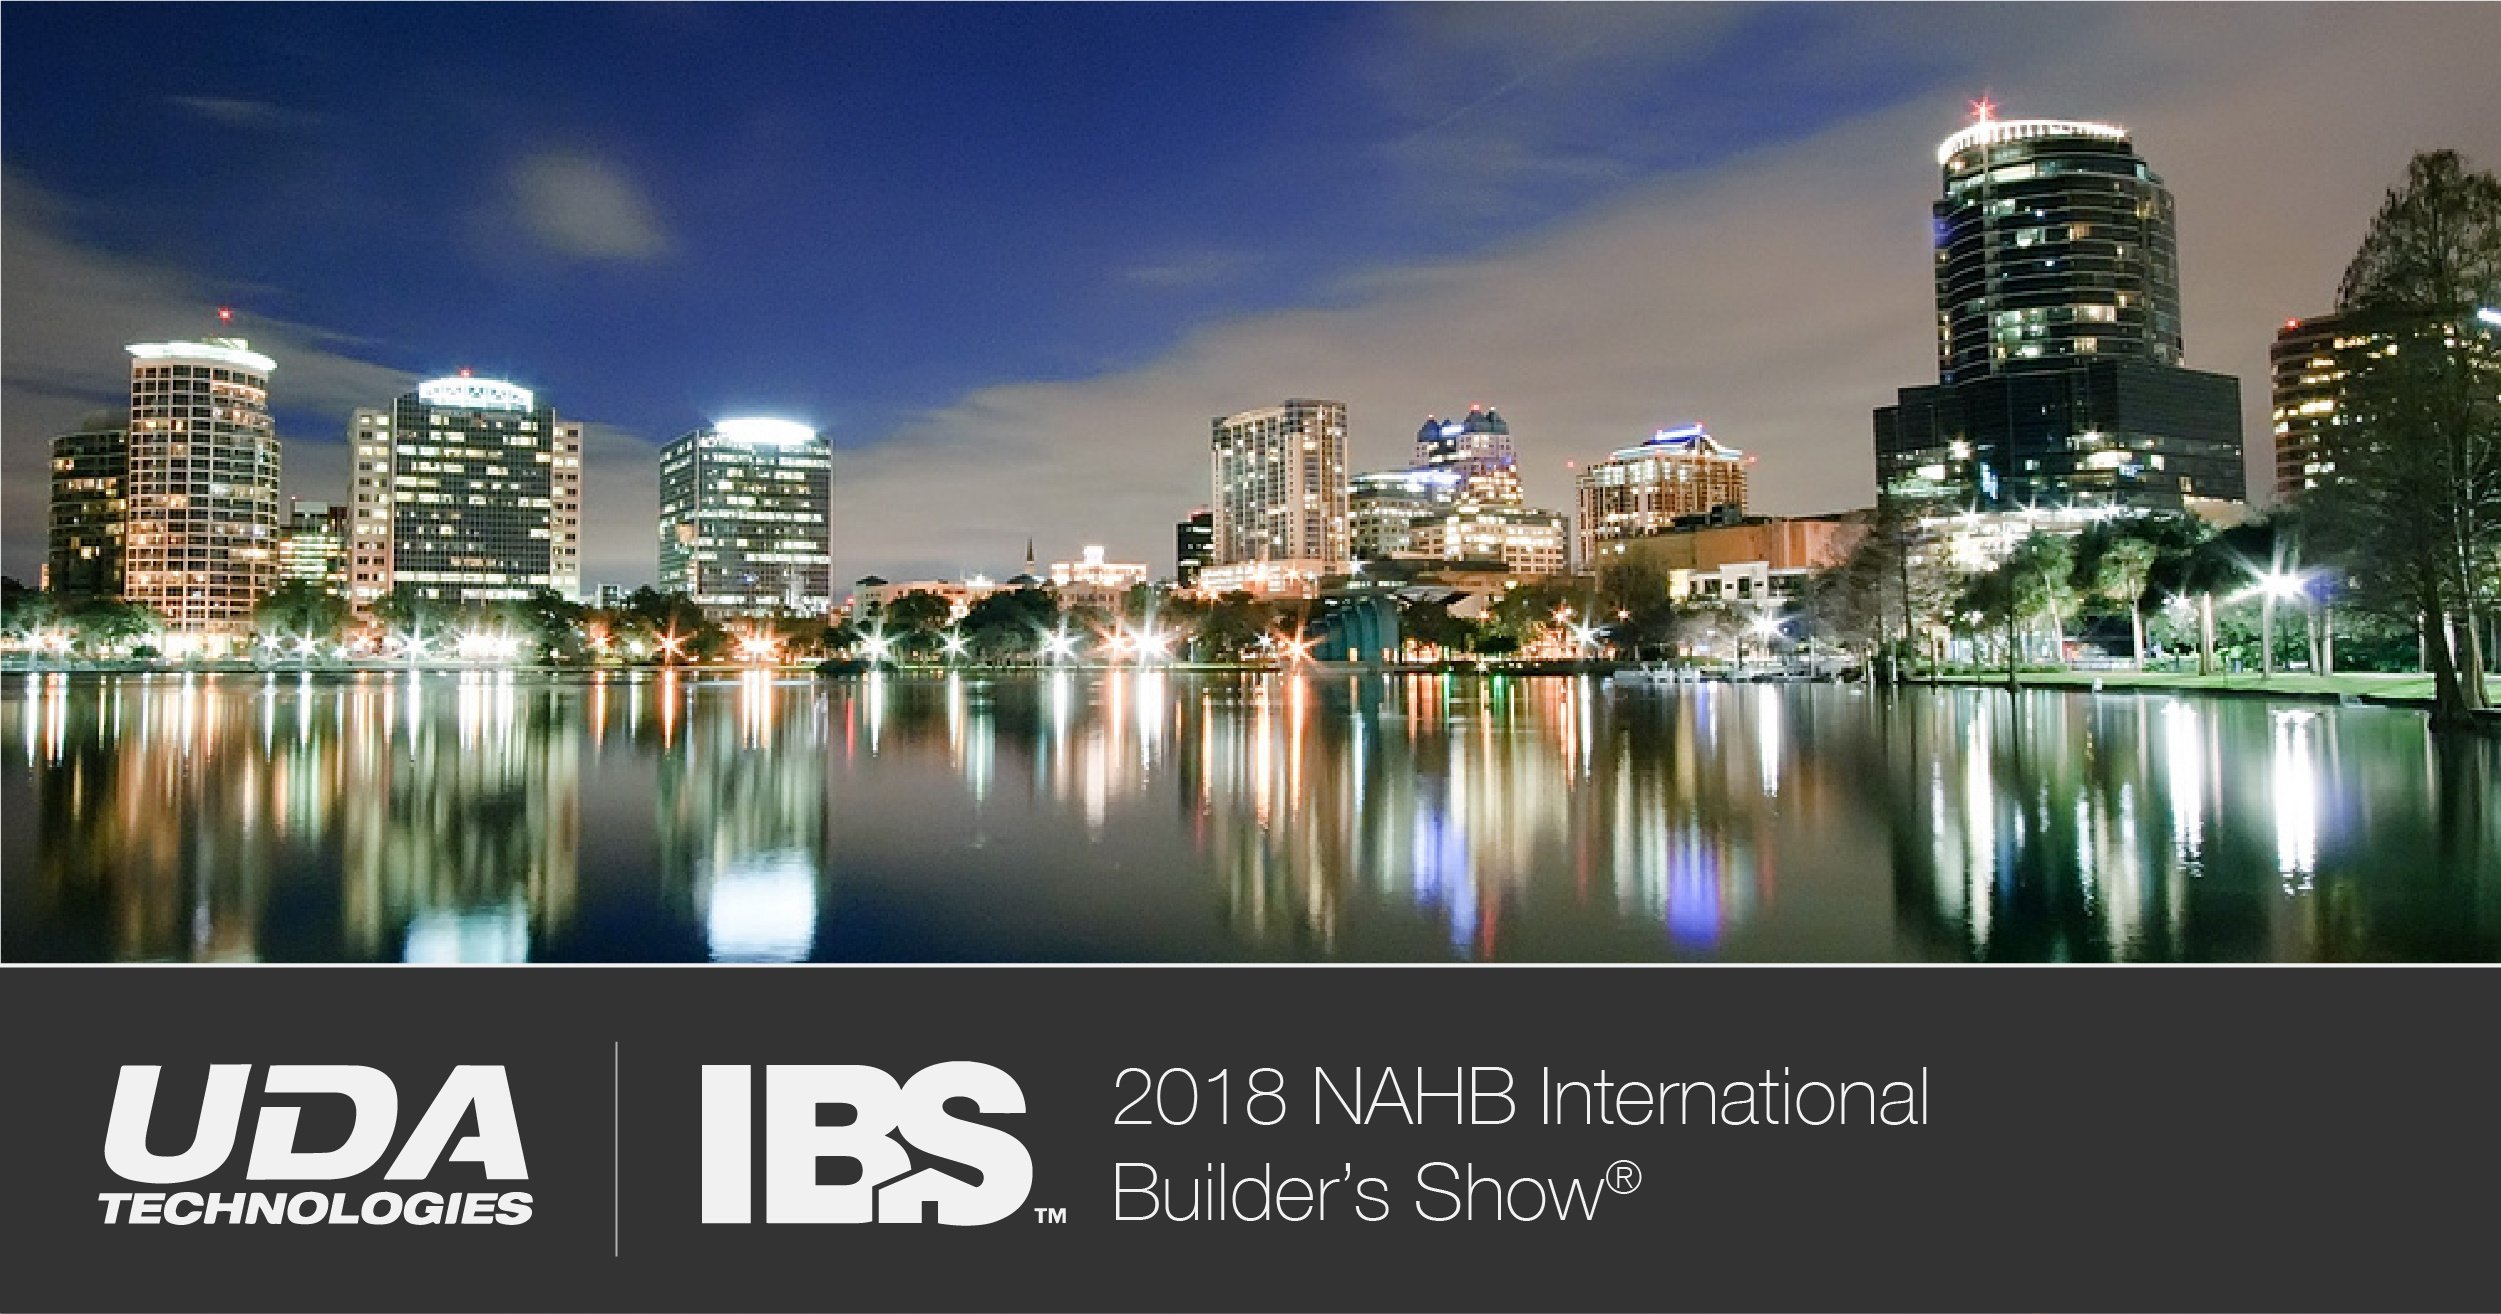 5 Reasons Why You Should Attend IBS 2018